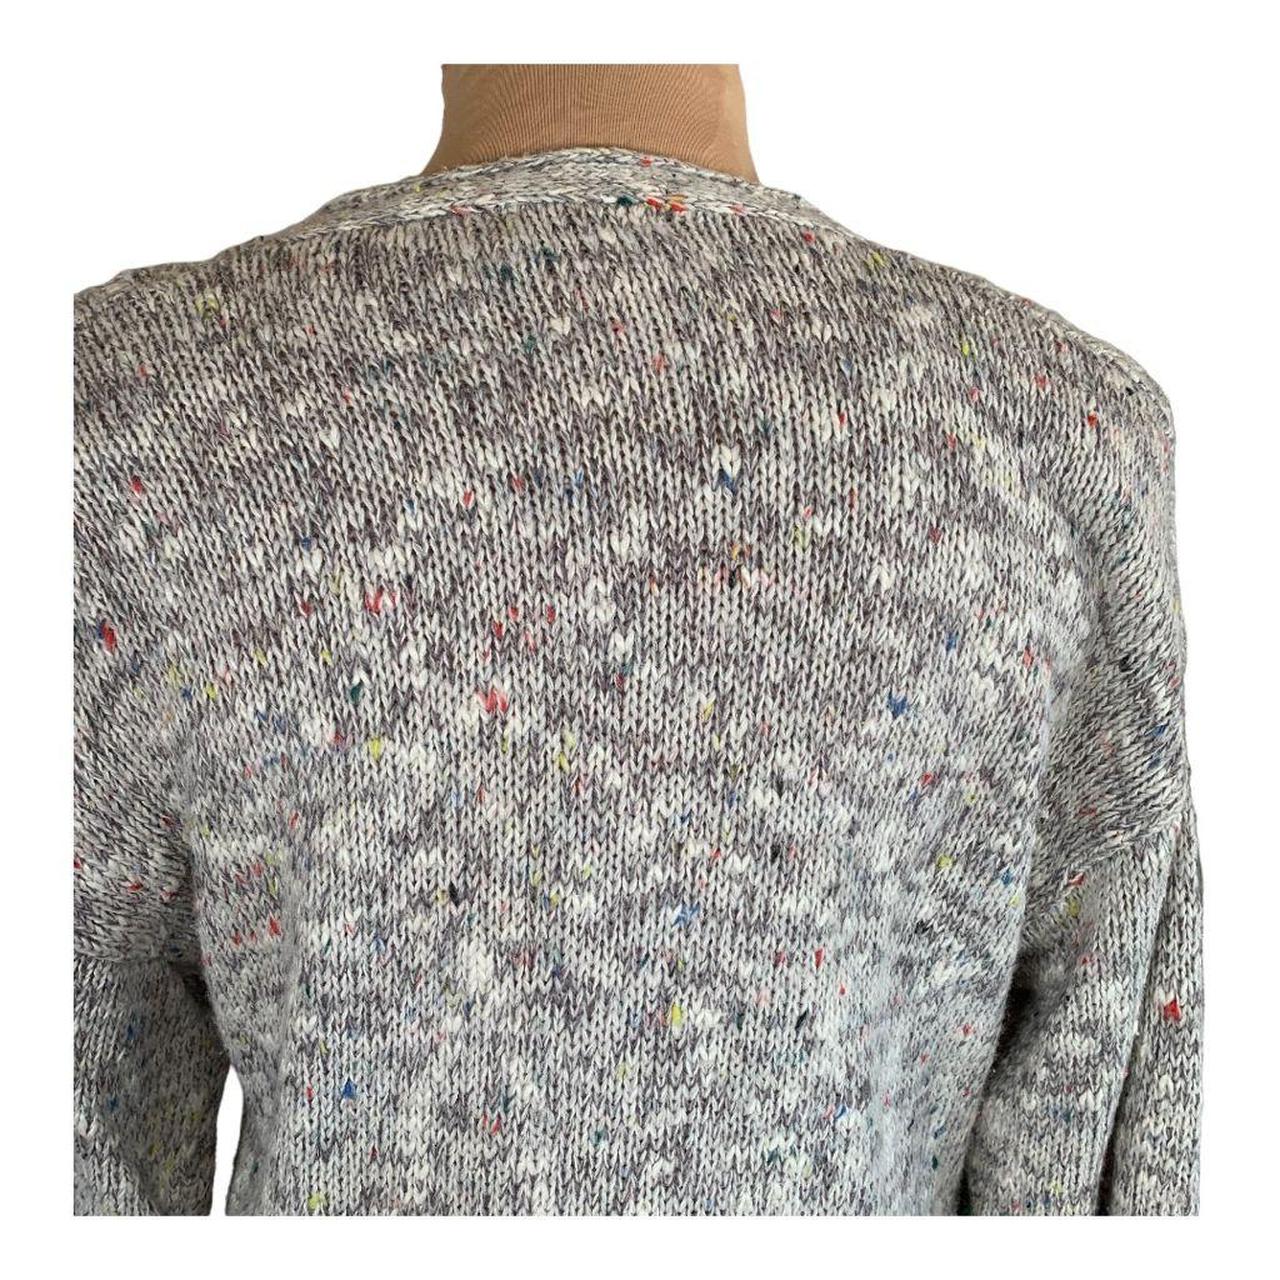 Product Image 4 - 80s Cristina Gray Sweater Vintage